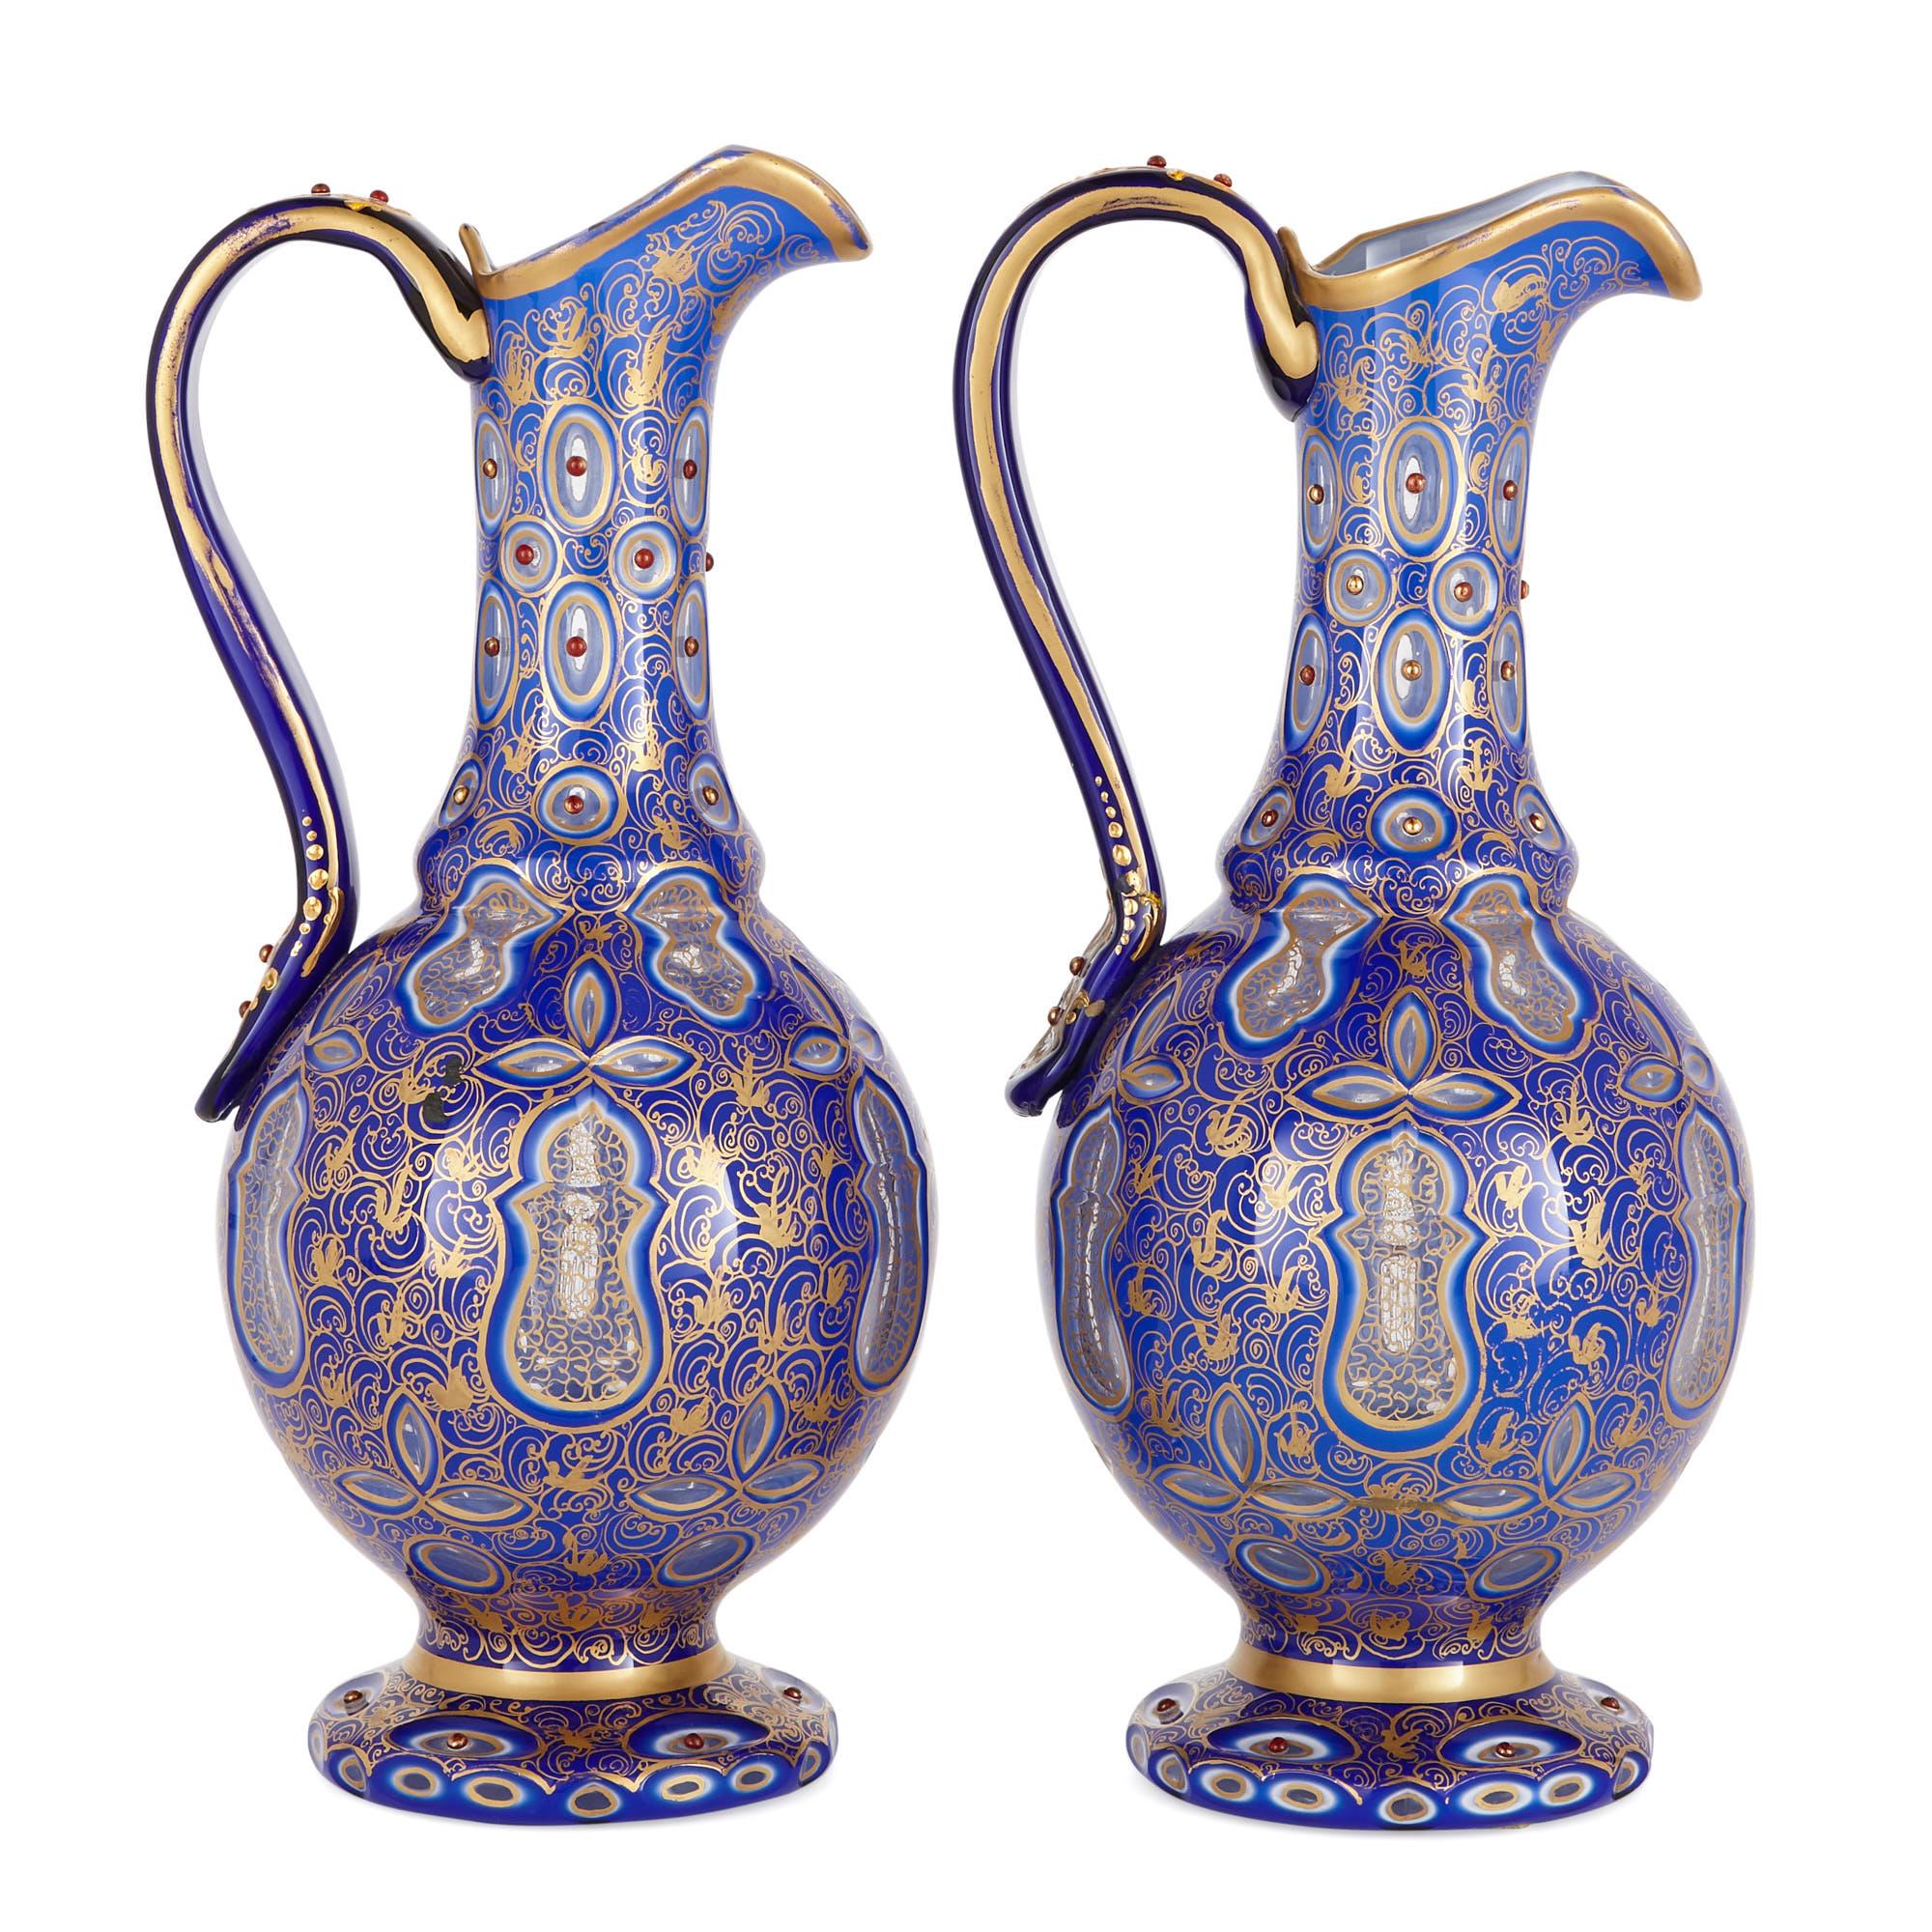 These jugs were crafted in Bohemia, a historic region (which today forms part of the Czech Republic) known across the world for the high quality, exceptional beauty and craftsmanship of its glassware. These jugs were created in Bohemia but most